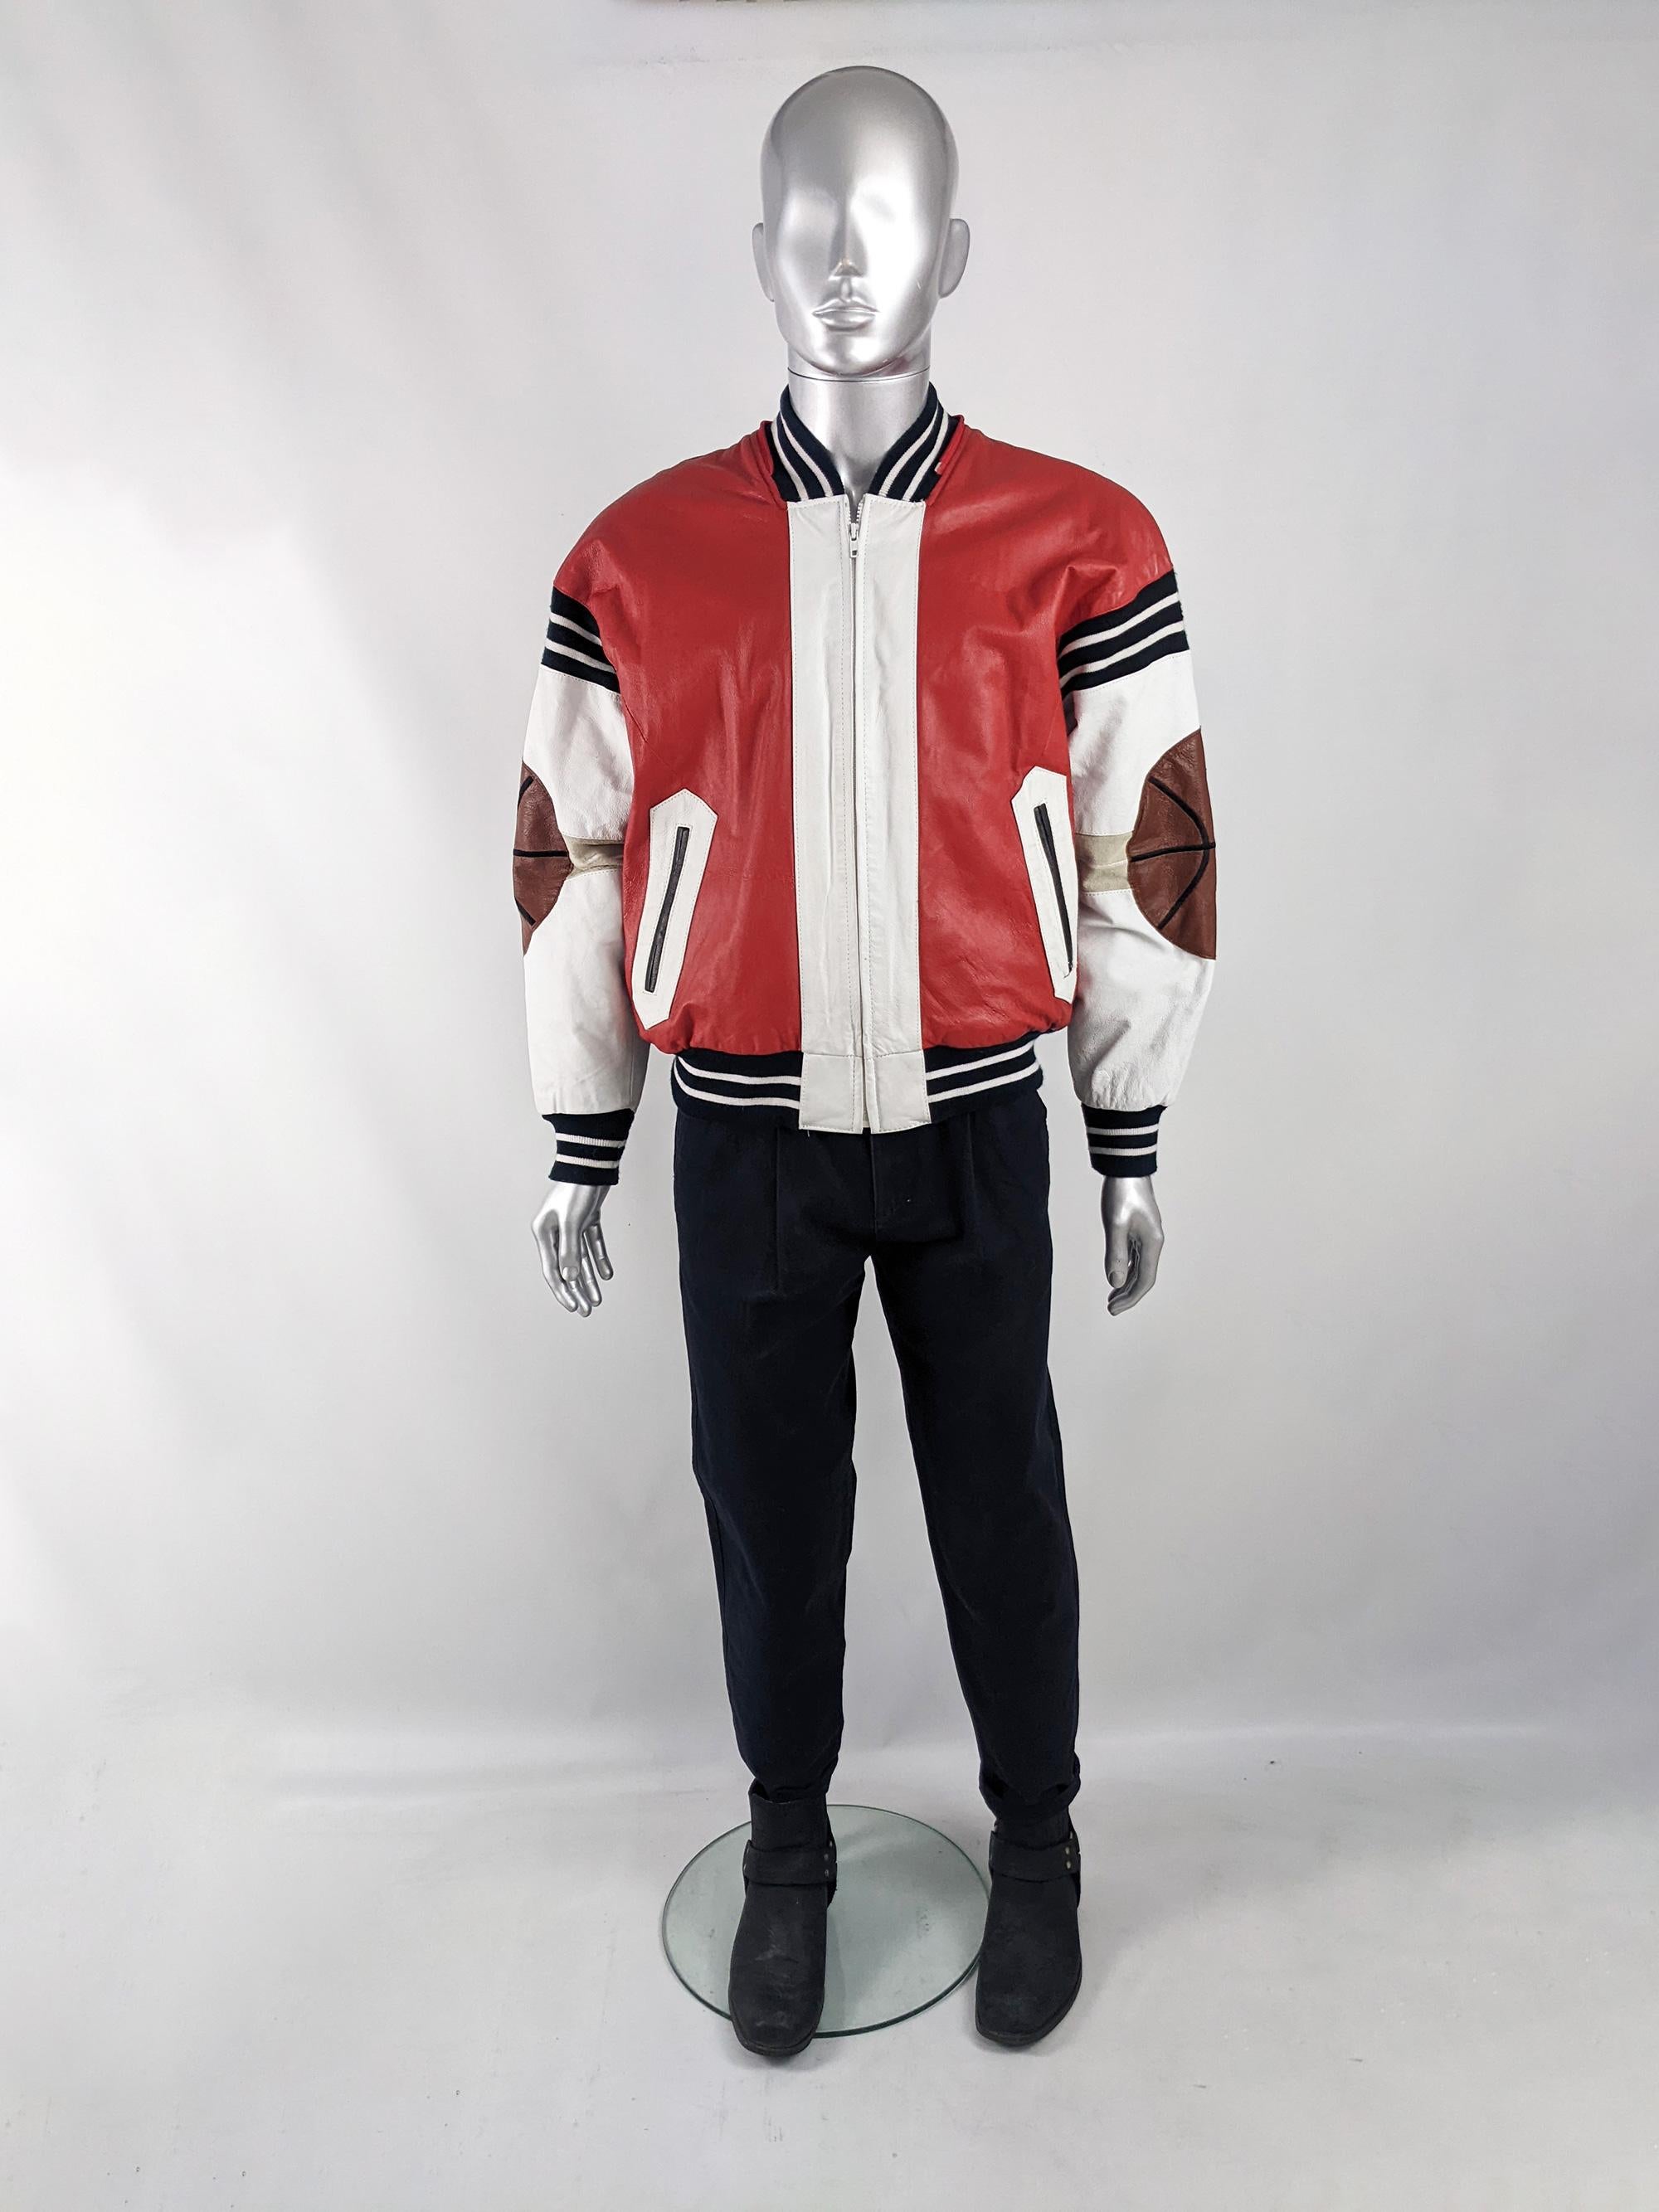 An incredible and rare vintage mens leather bomber jacket from the 80s by luxury American leatherwear designer, Michael Hoban. In a red and white leather with amazing basketball leather appliques throughout. It has an oversized fit and a quilted